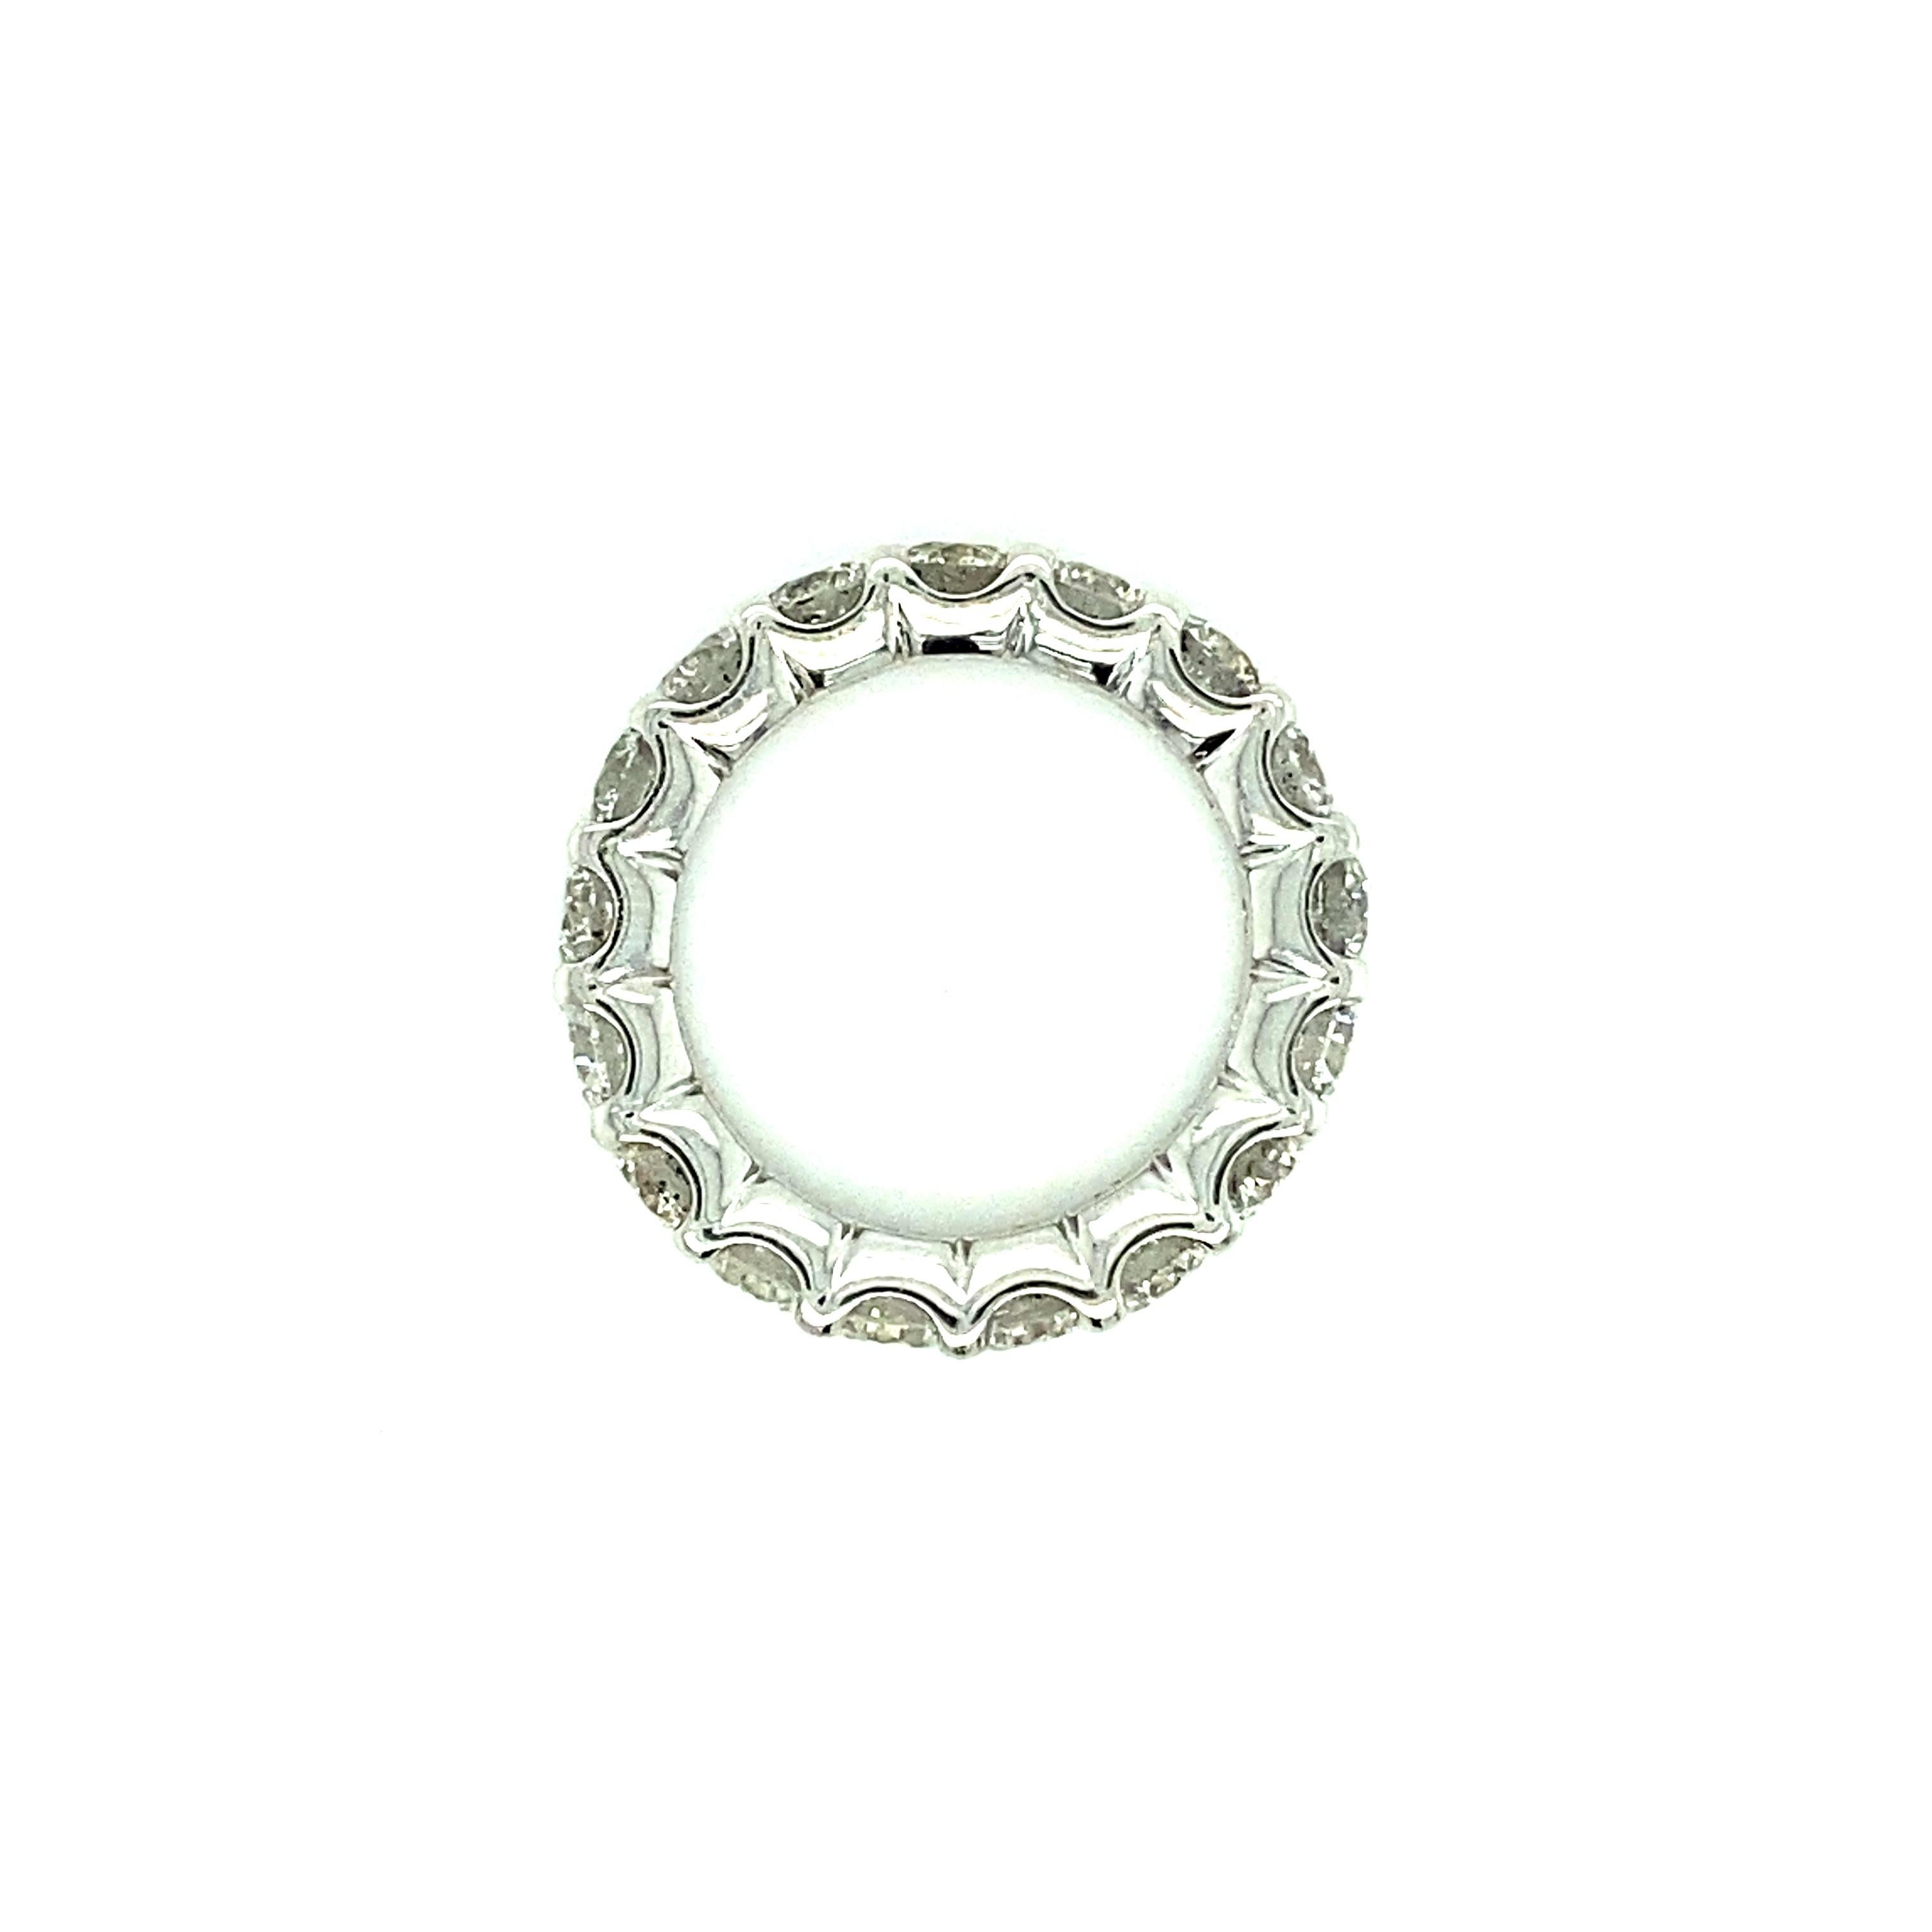 Offered here is a beautiful Diamond Eternity Band Ring in 18kt White Gold. 
Diamonds: 17 natural round brilliant cut diamonds with an estimated total weight of 5.20 ct. Color is H and Clarity is SI2 
Weight: item weighs around 7.60gr